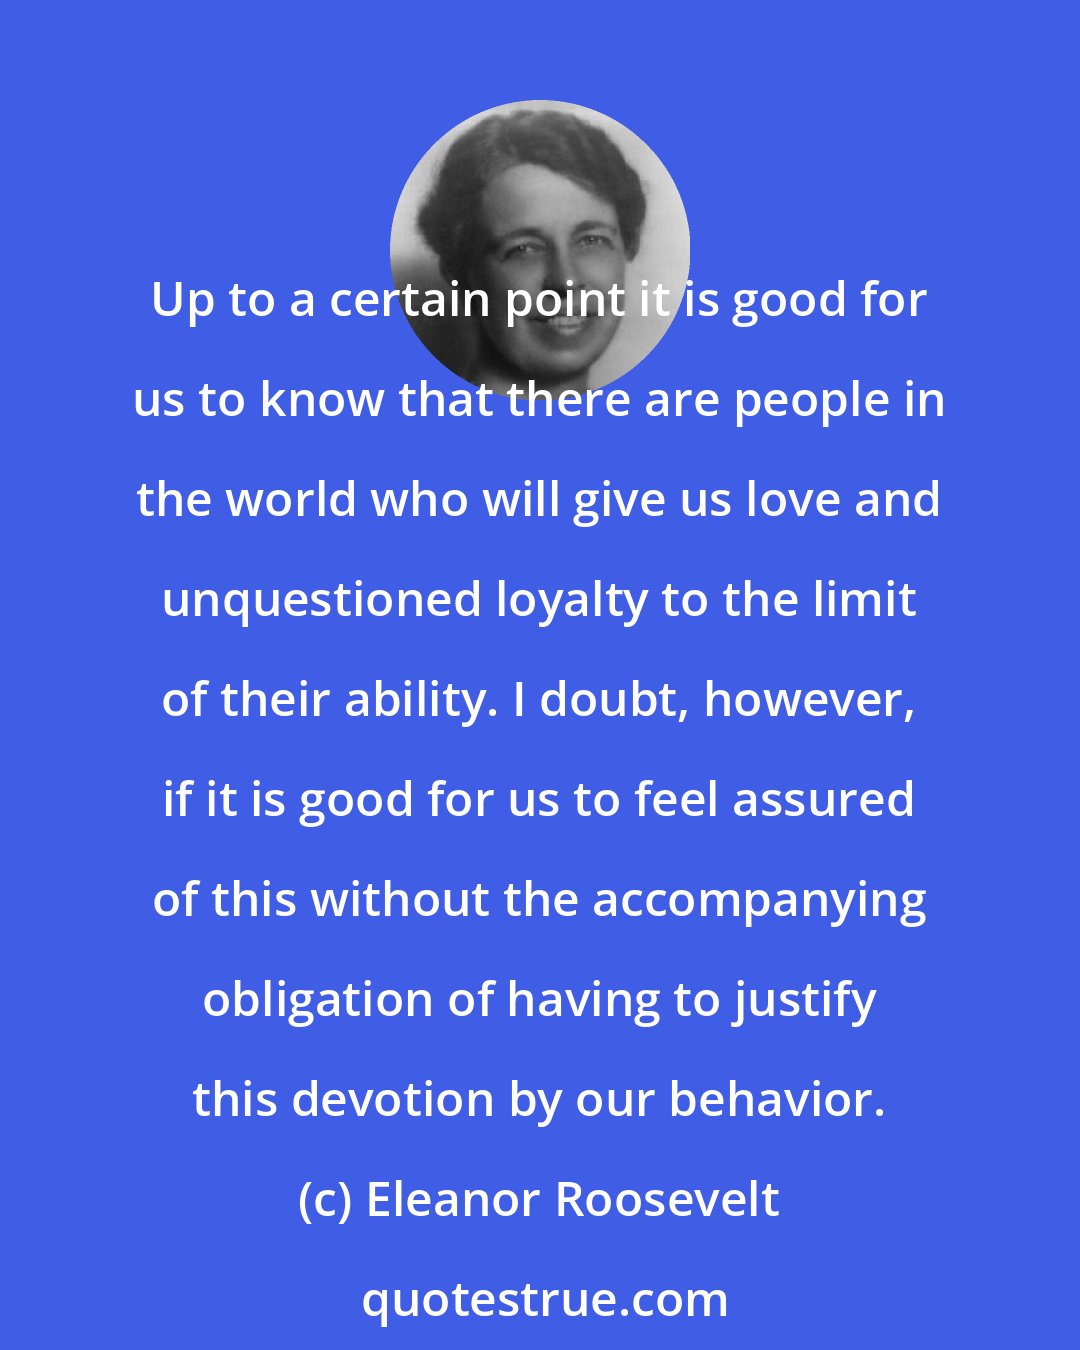 Eleanor Roosevelt: Up to a certain point it is good for us to know that there are people in the world who will give us love and unquestioned loyalty to the limit of their ability. I doubt, however, if it is good for us to feel assured of this without the accompanying obligation of having to justify this devotion by our behavior.